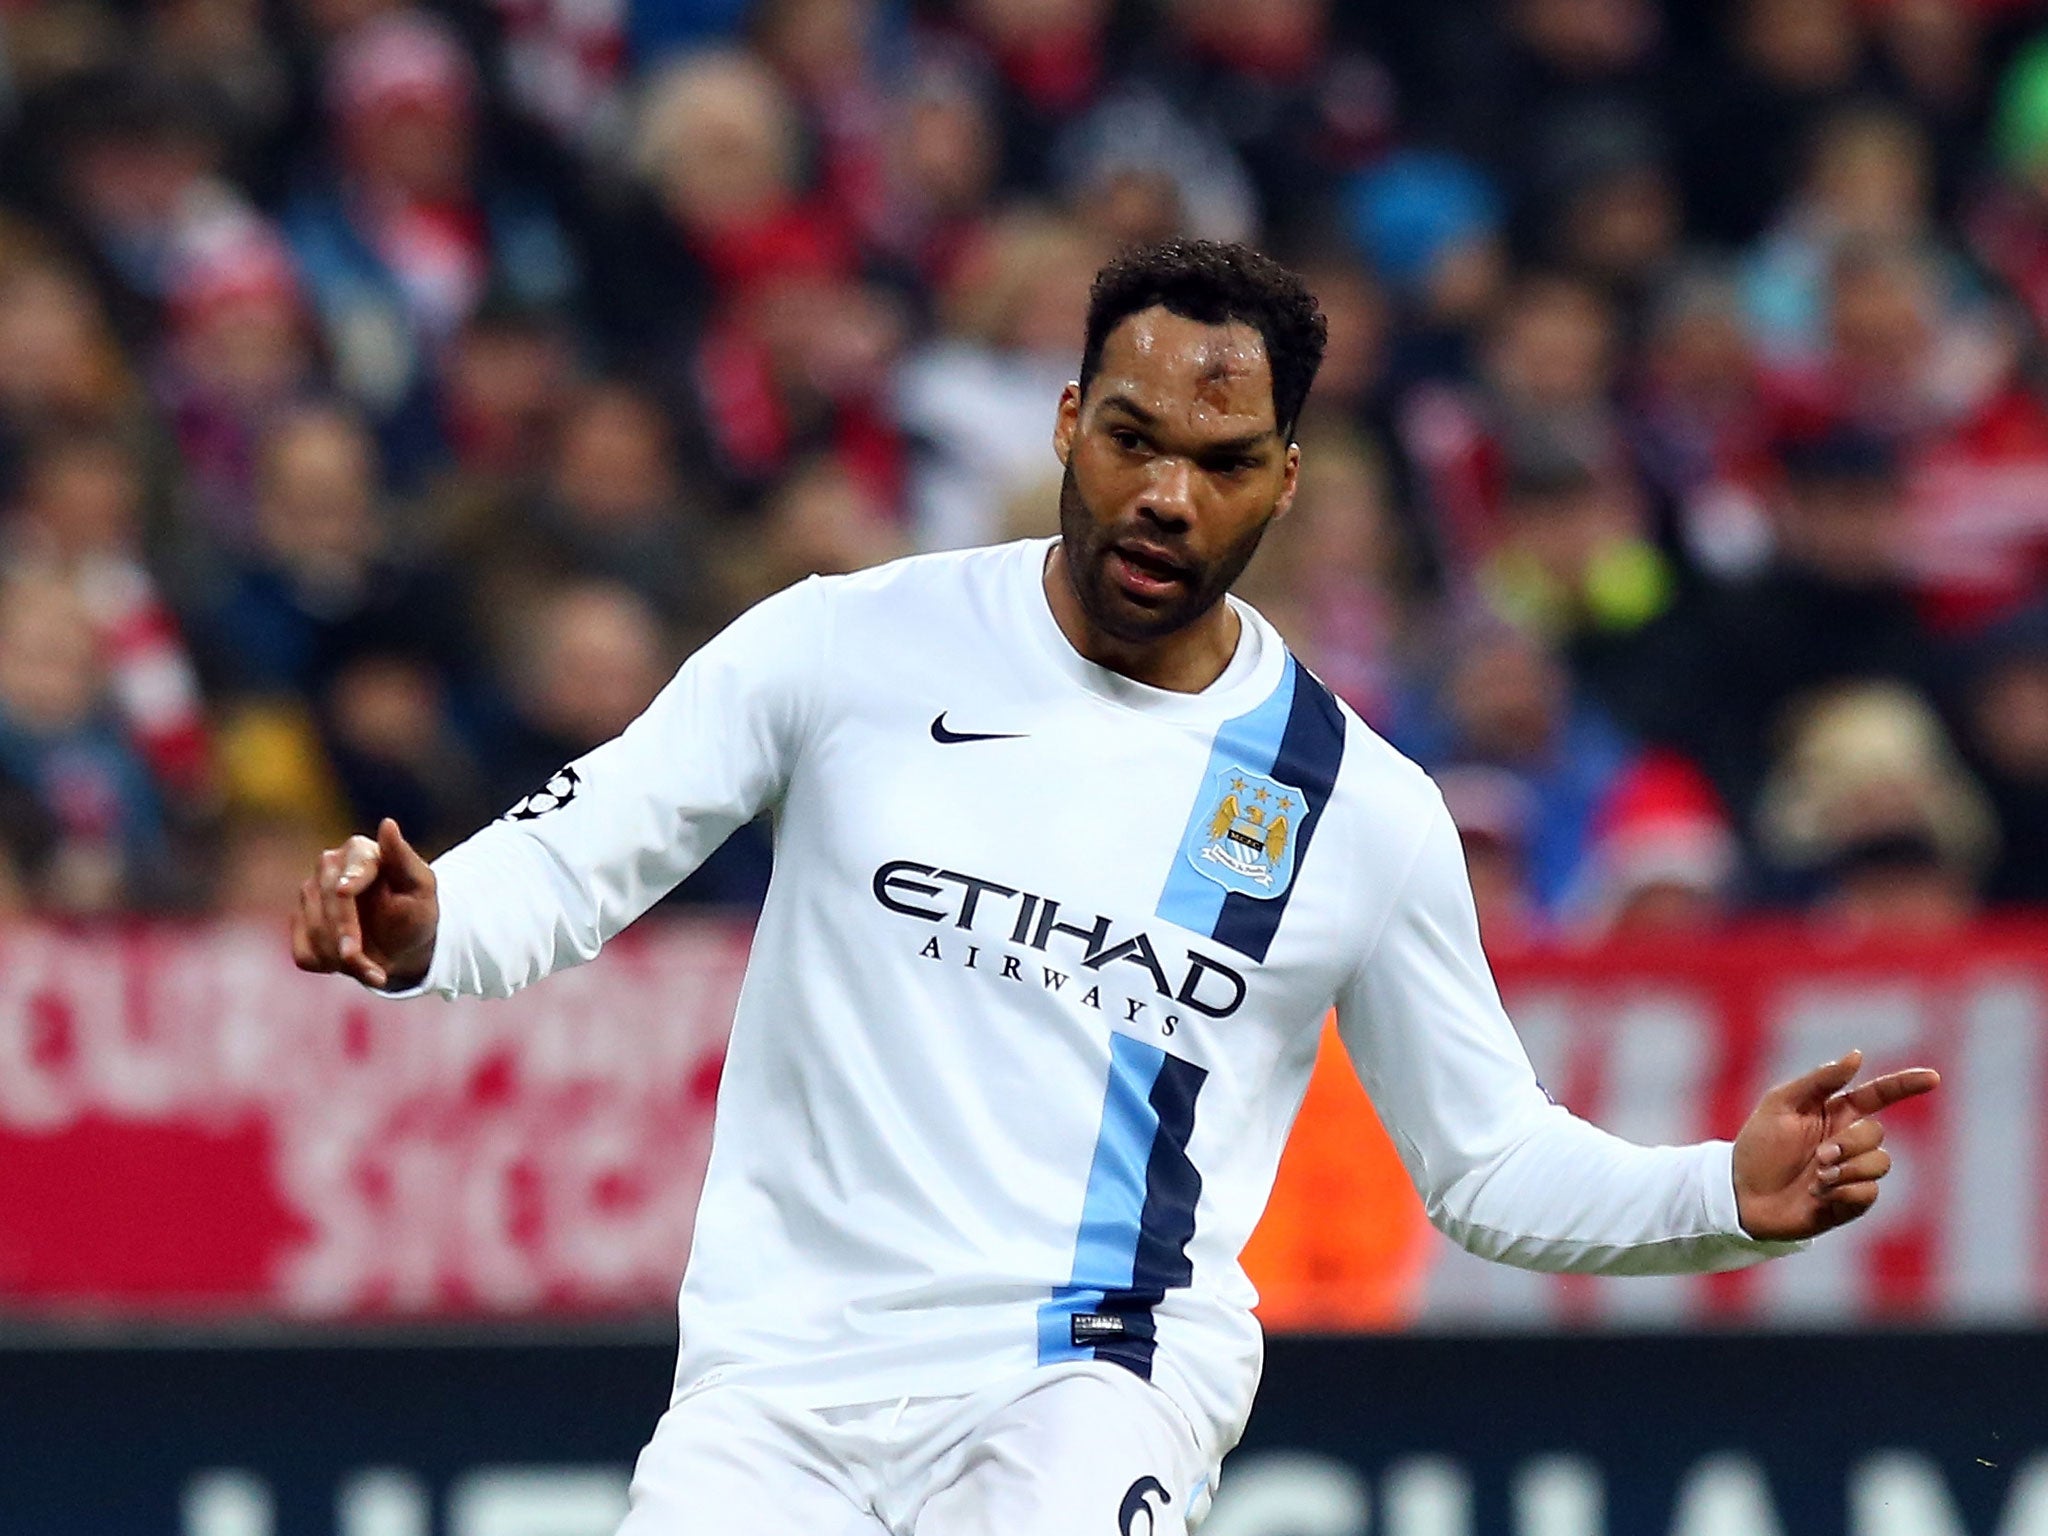 Manchester City defender Joleon Lescott will be staying at the Etihad